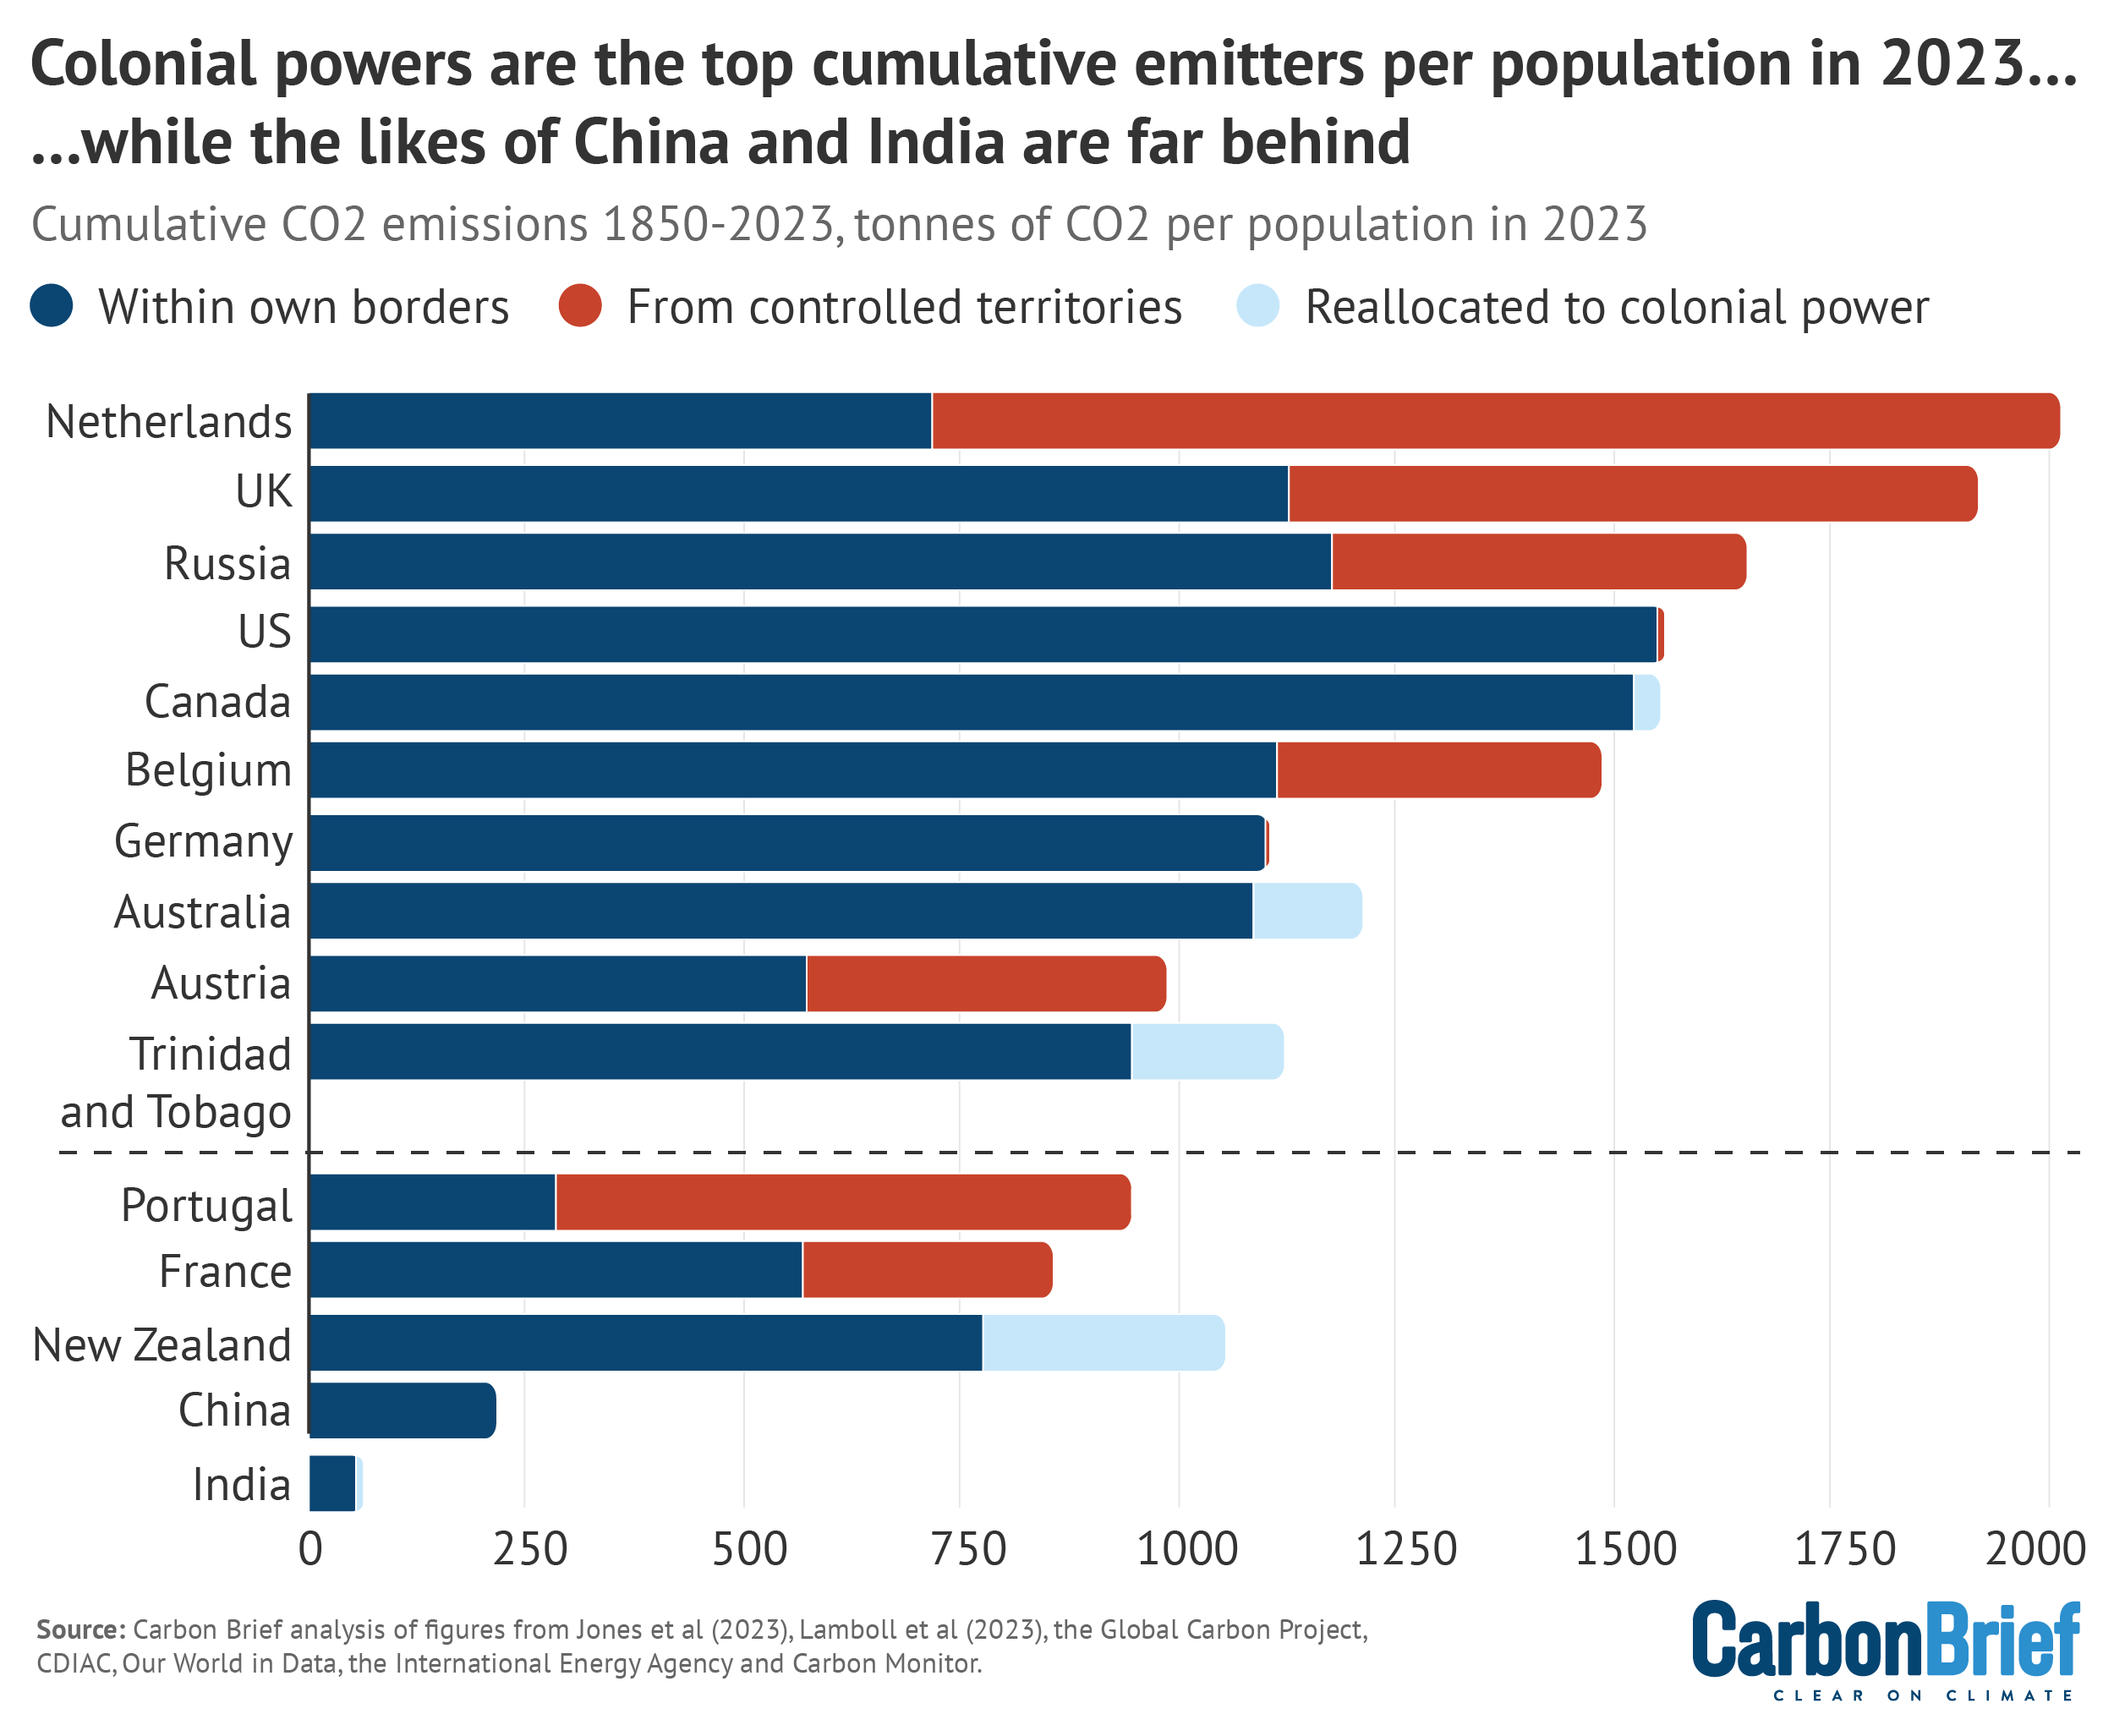 Colonial powers are the top cumulative emitters per population in 2023...while the likes of China and India are far behind